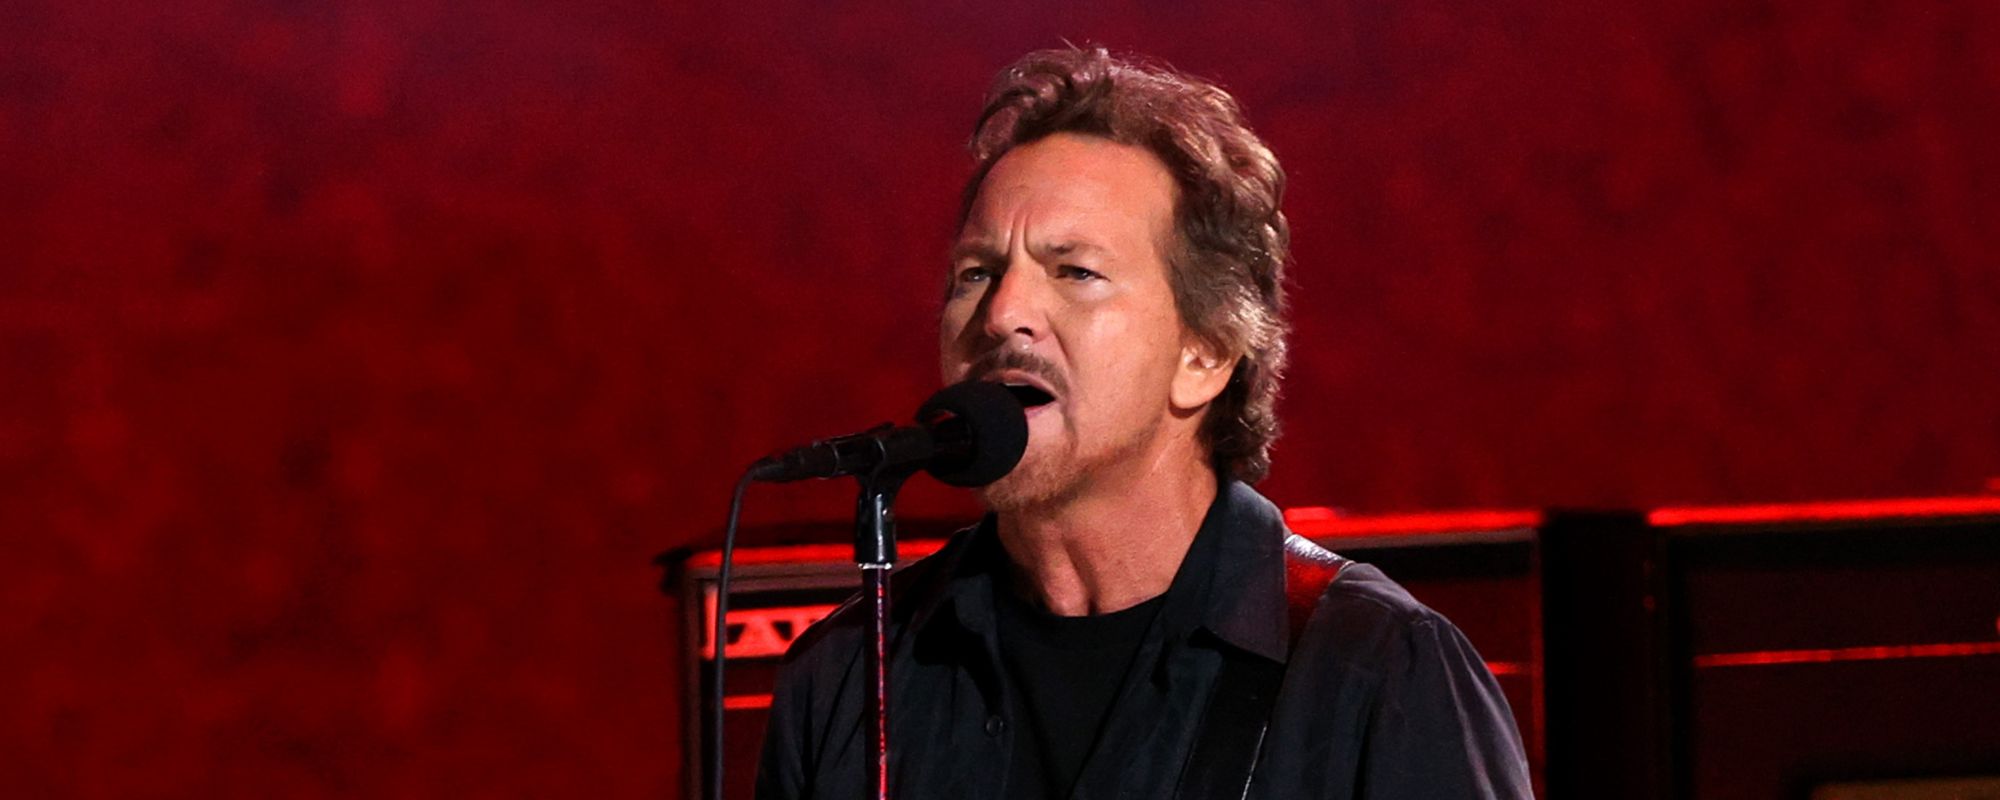 Eddie Vedder Says Donald Trump Inspired Pearl Jam’s New Song